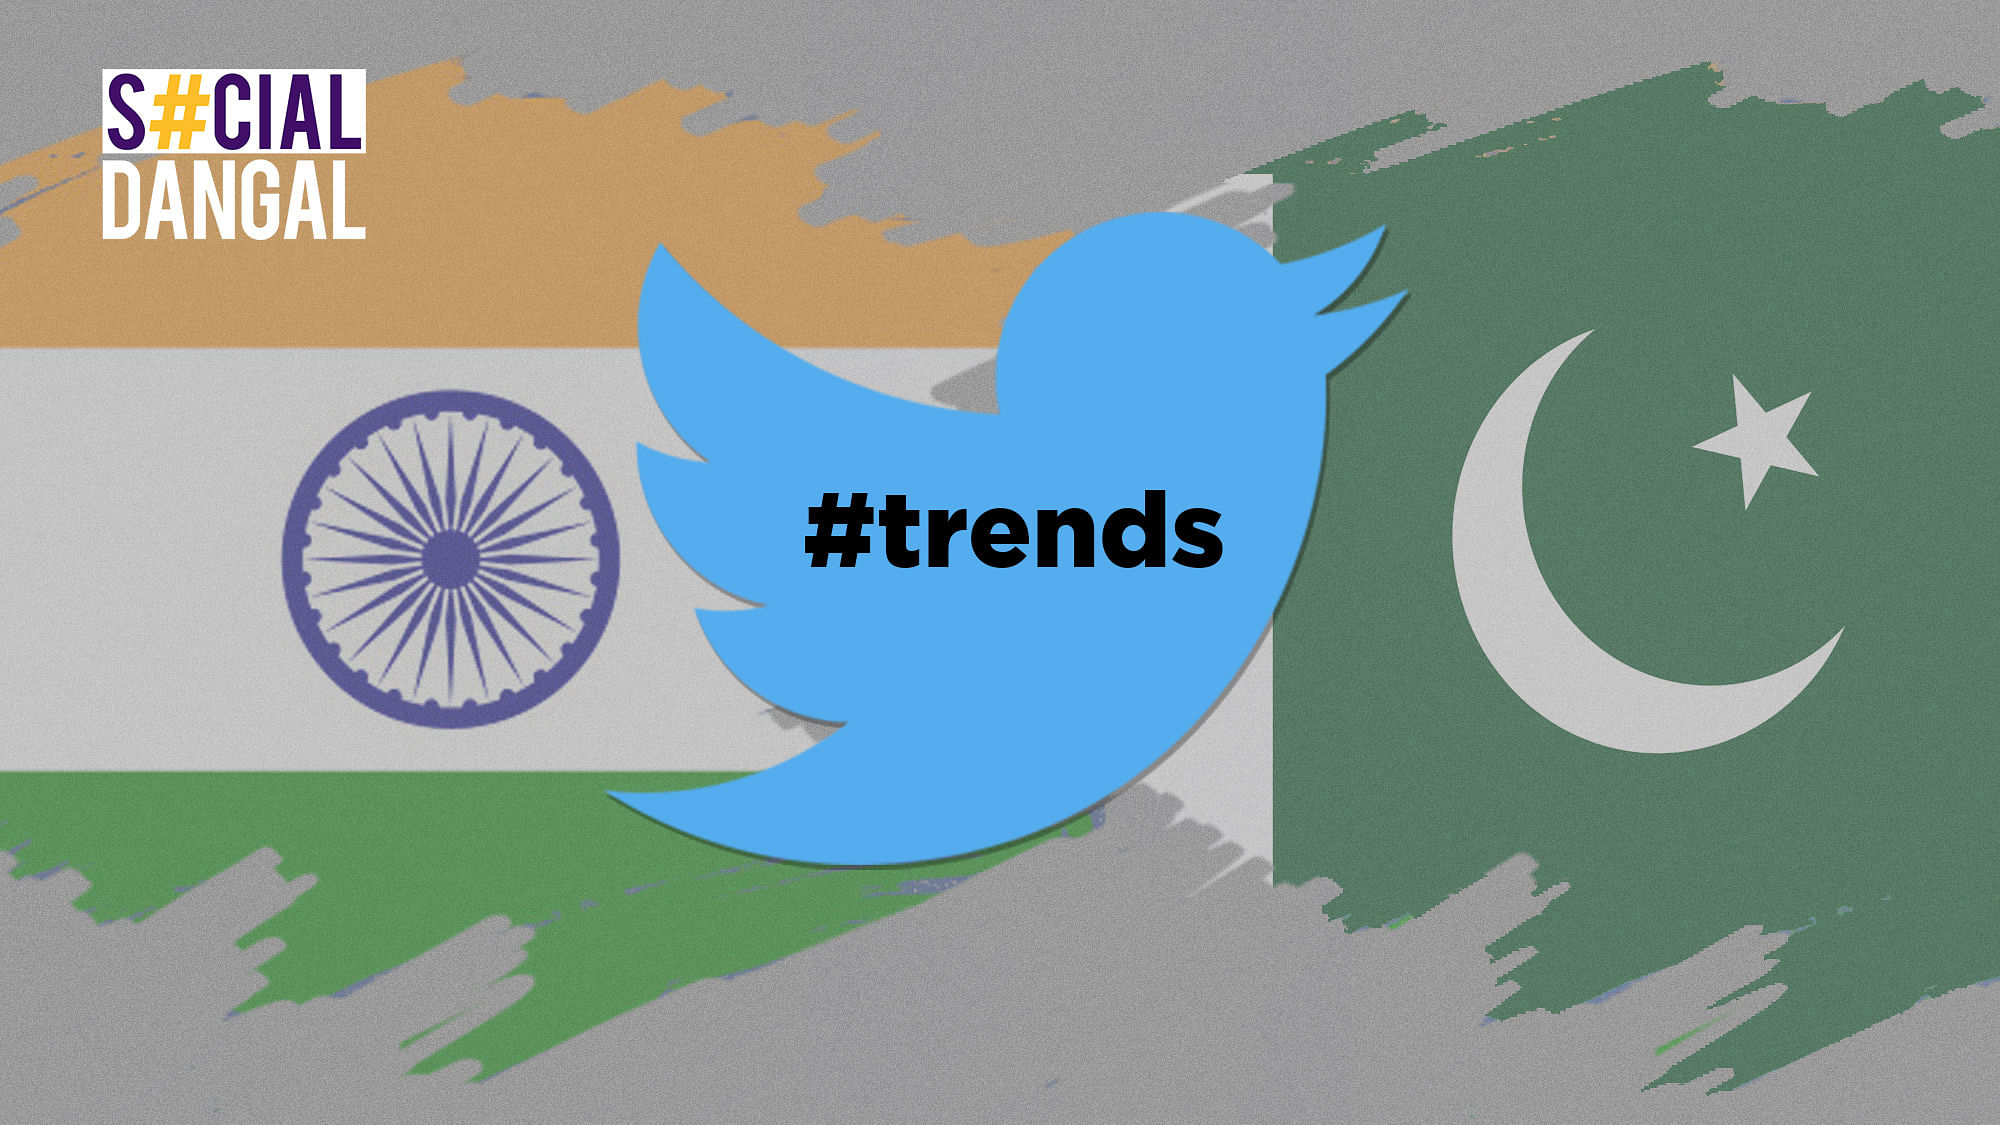 Twitter was flooded with tweets about the MiG crash at the Indo-Pak border on 27 February 2019.